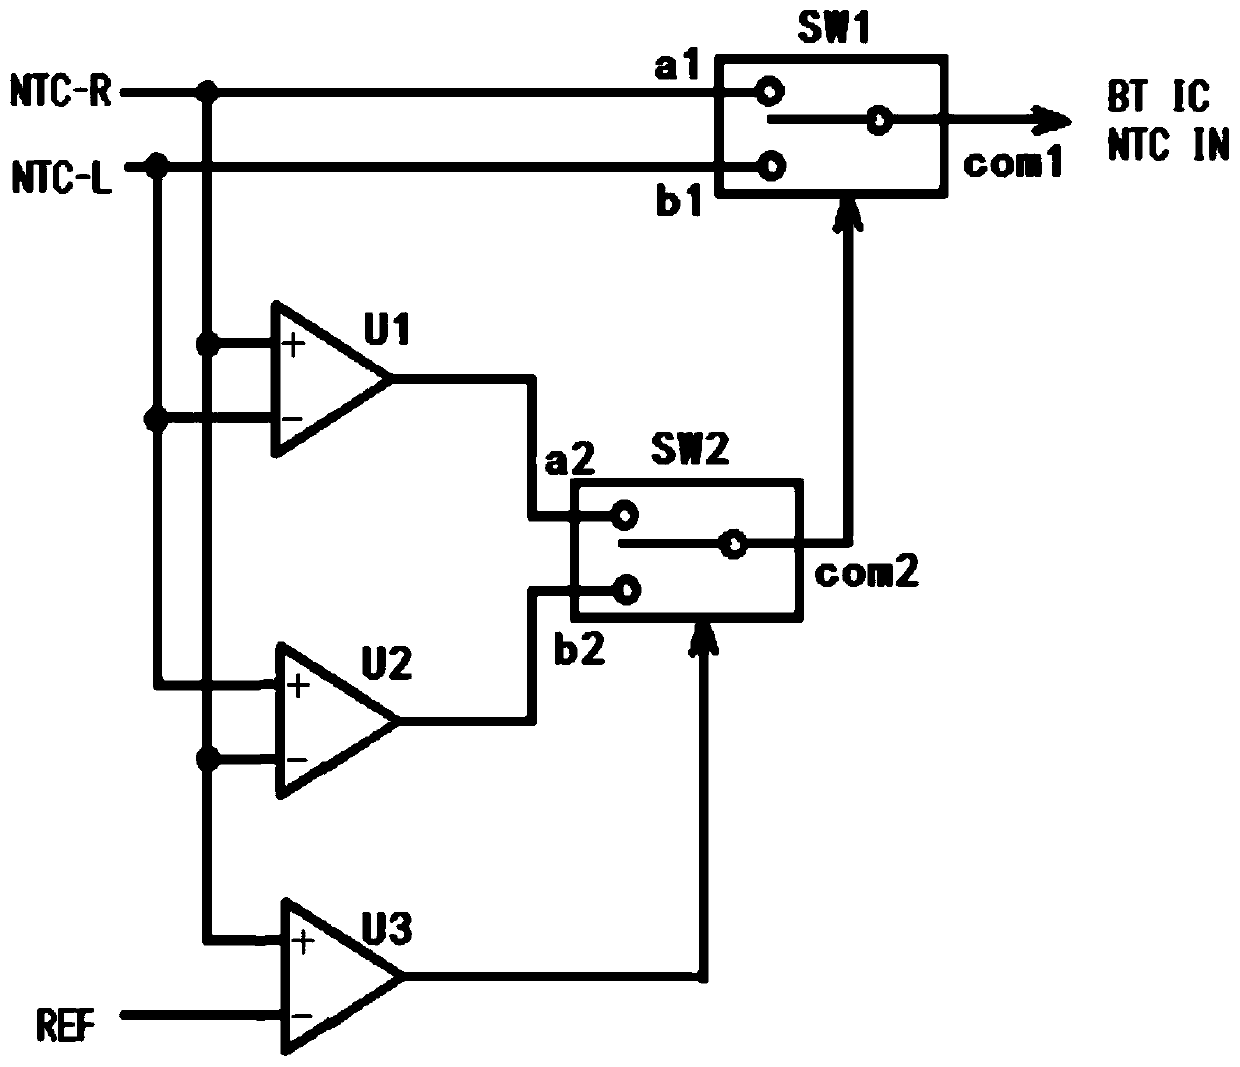 Bluetooth headset and temperature screening circuit therein